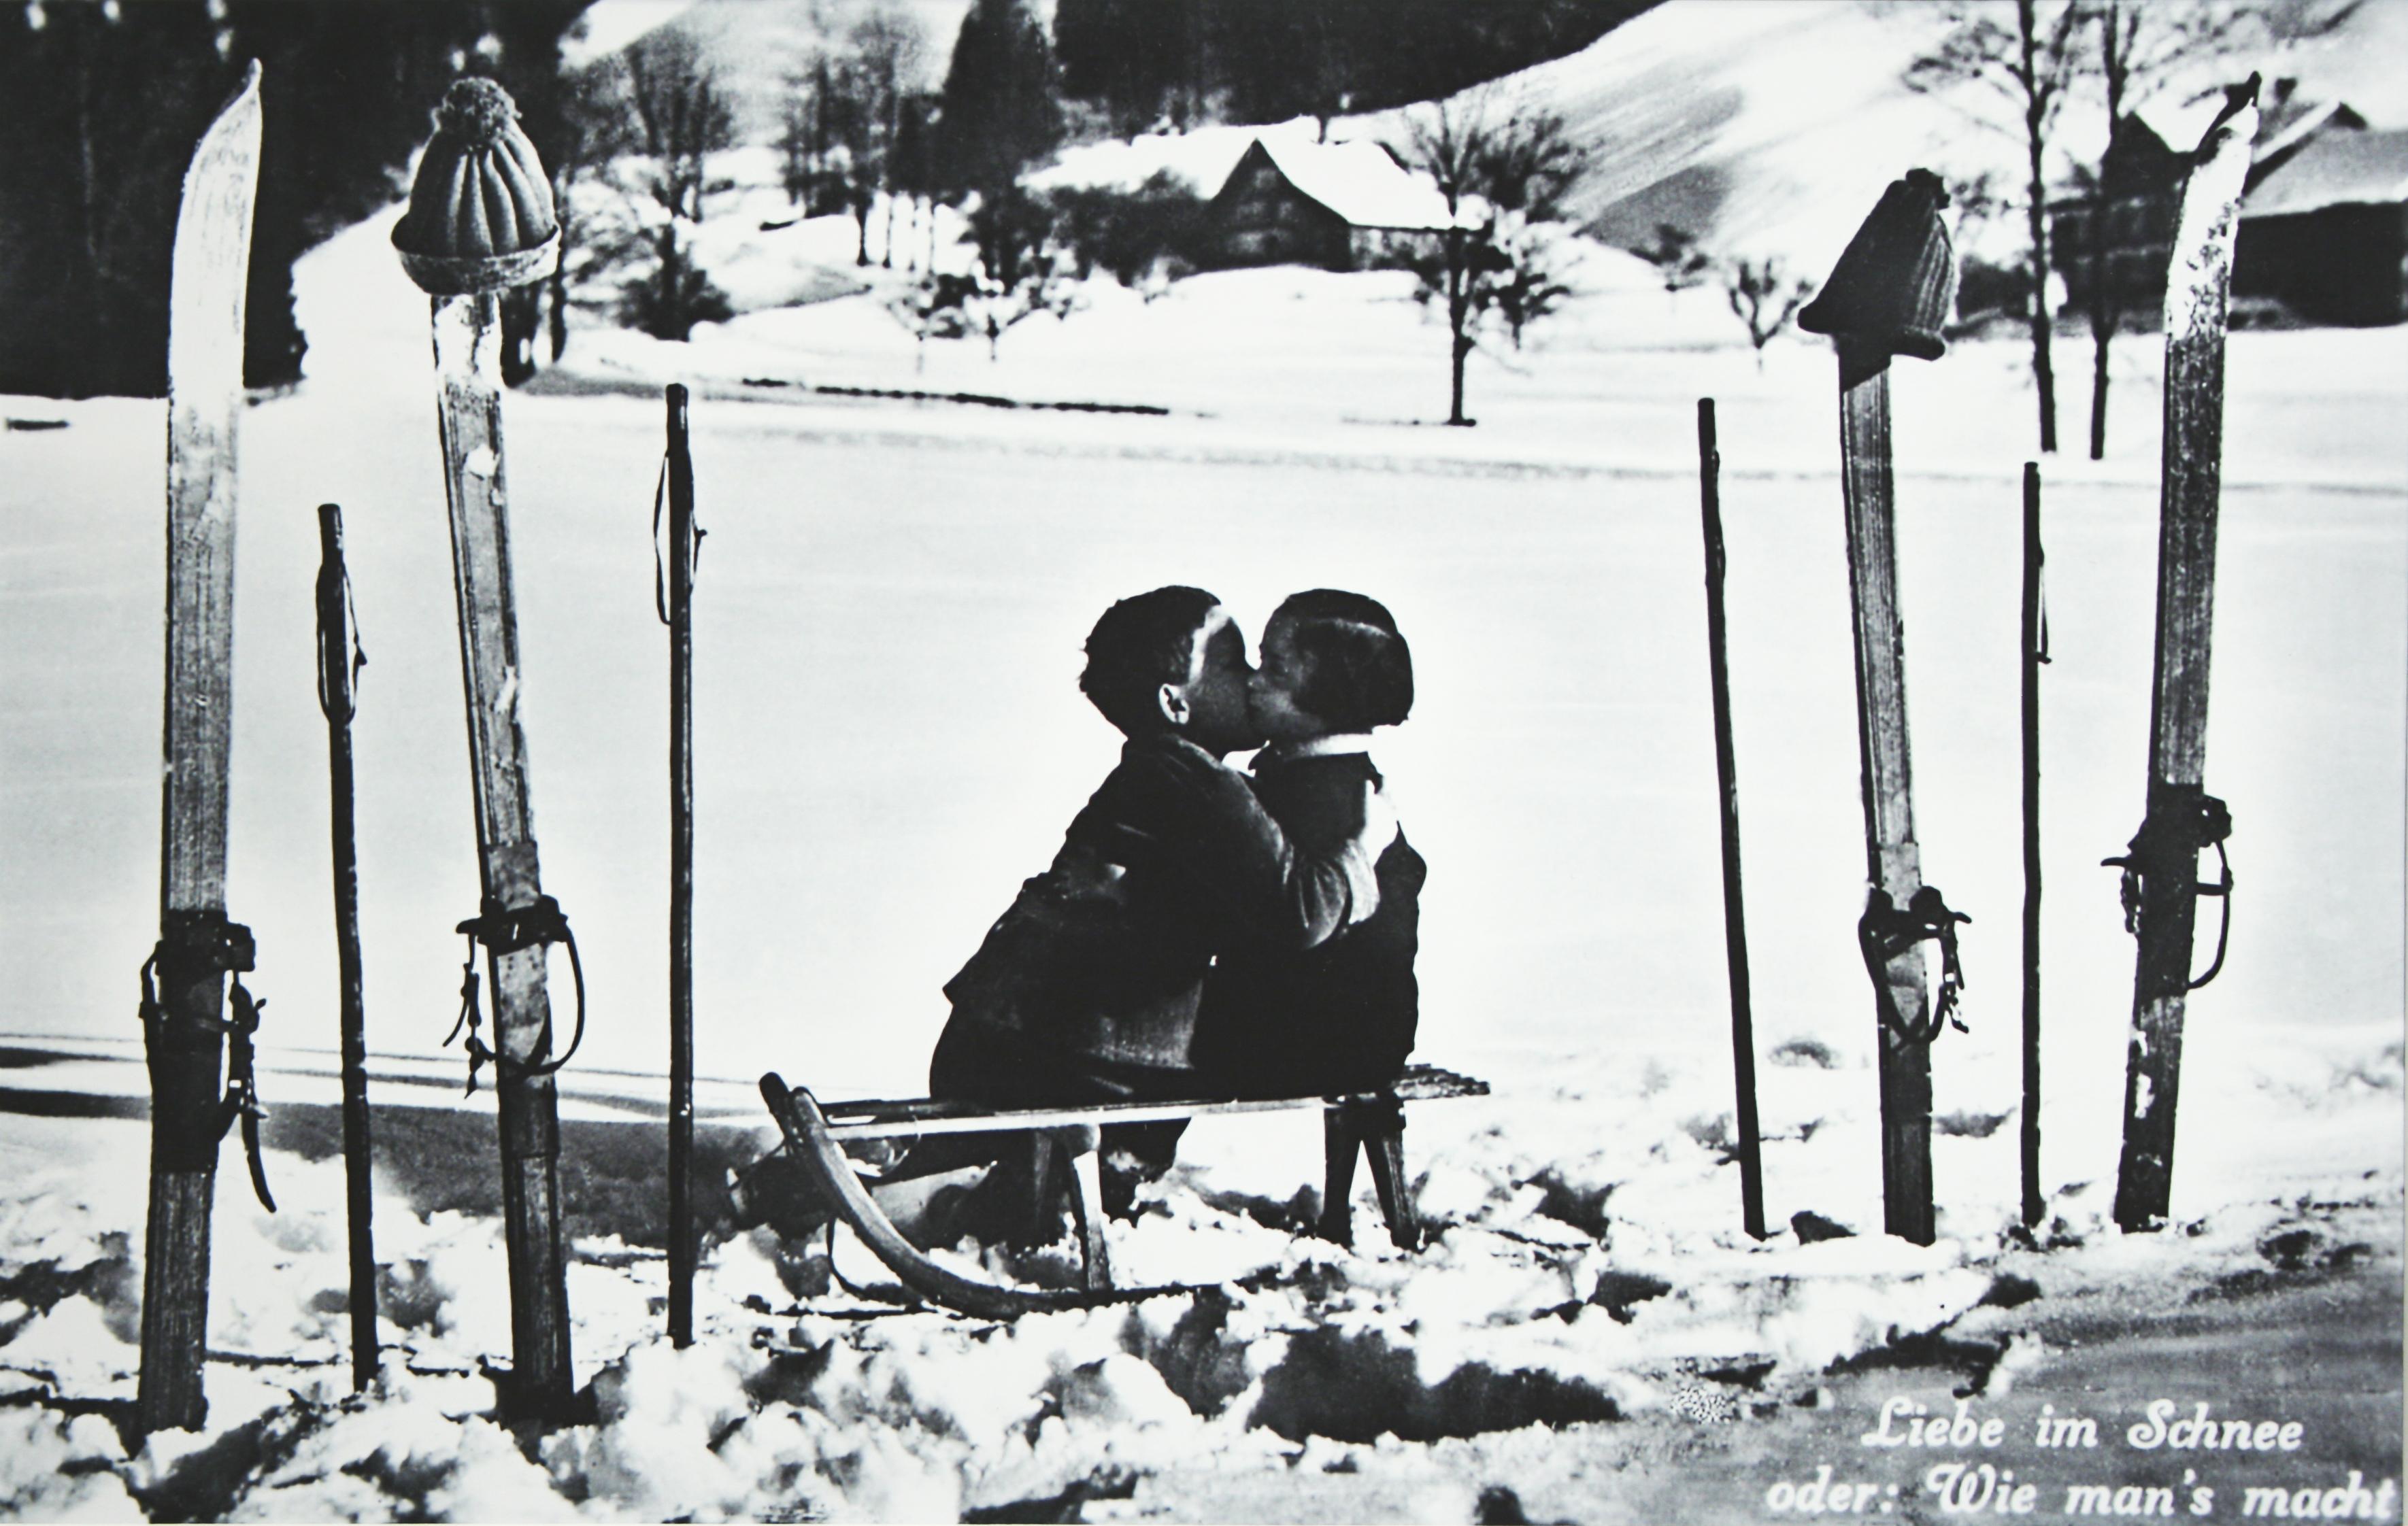 Vintage, Alpine Ski photograph.
'LIEBE IM SCHNEE', a new mounted black and white photographic image after an original 1930s skiing photograph. Black and white alpine photos are the perfect addition to any home or ski lodge. Prior to being a